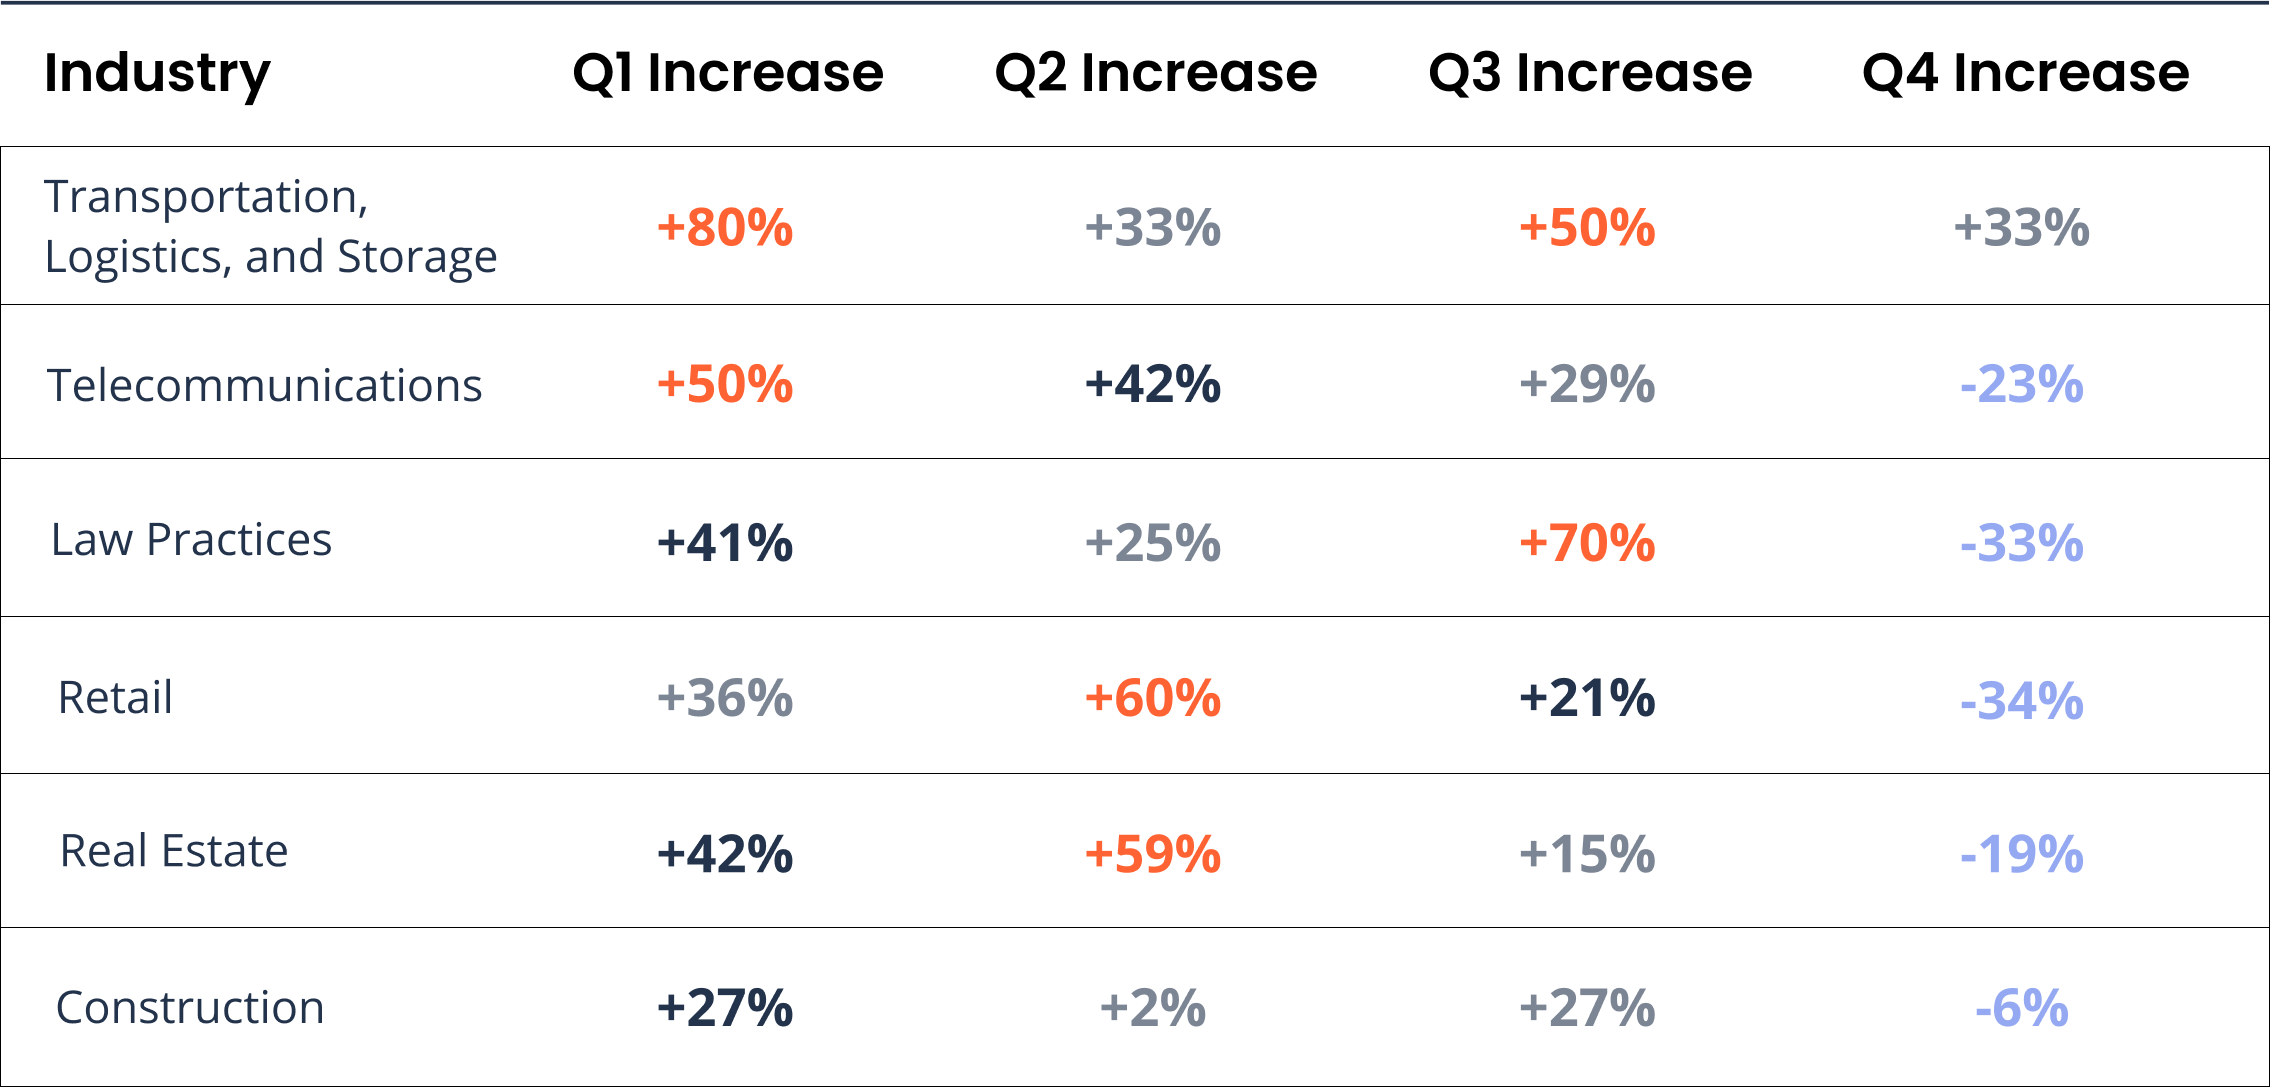 [CHART] Industry ransomware trends from Q1 to Q4